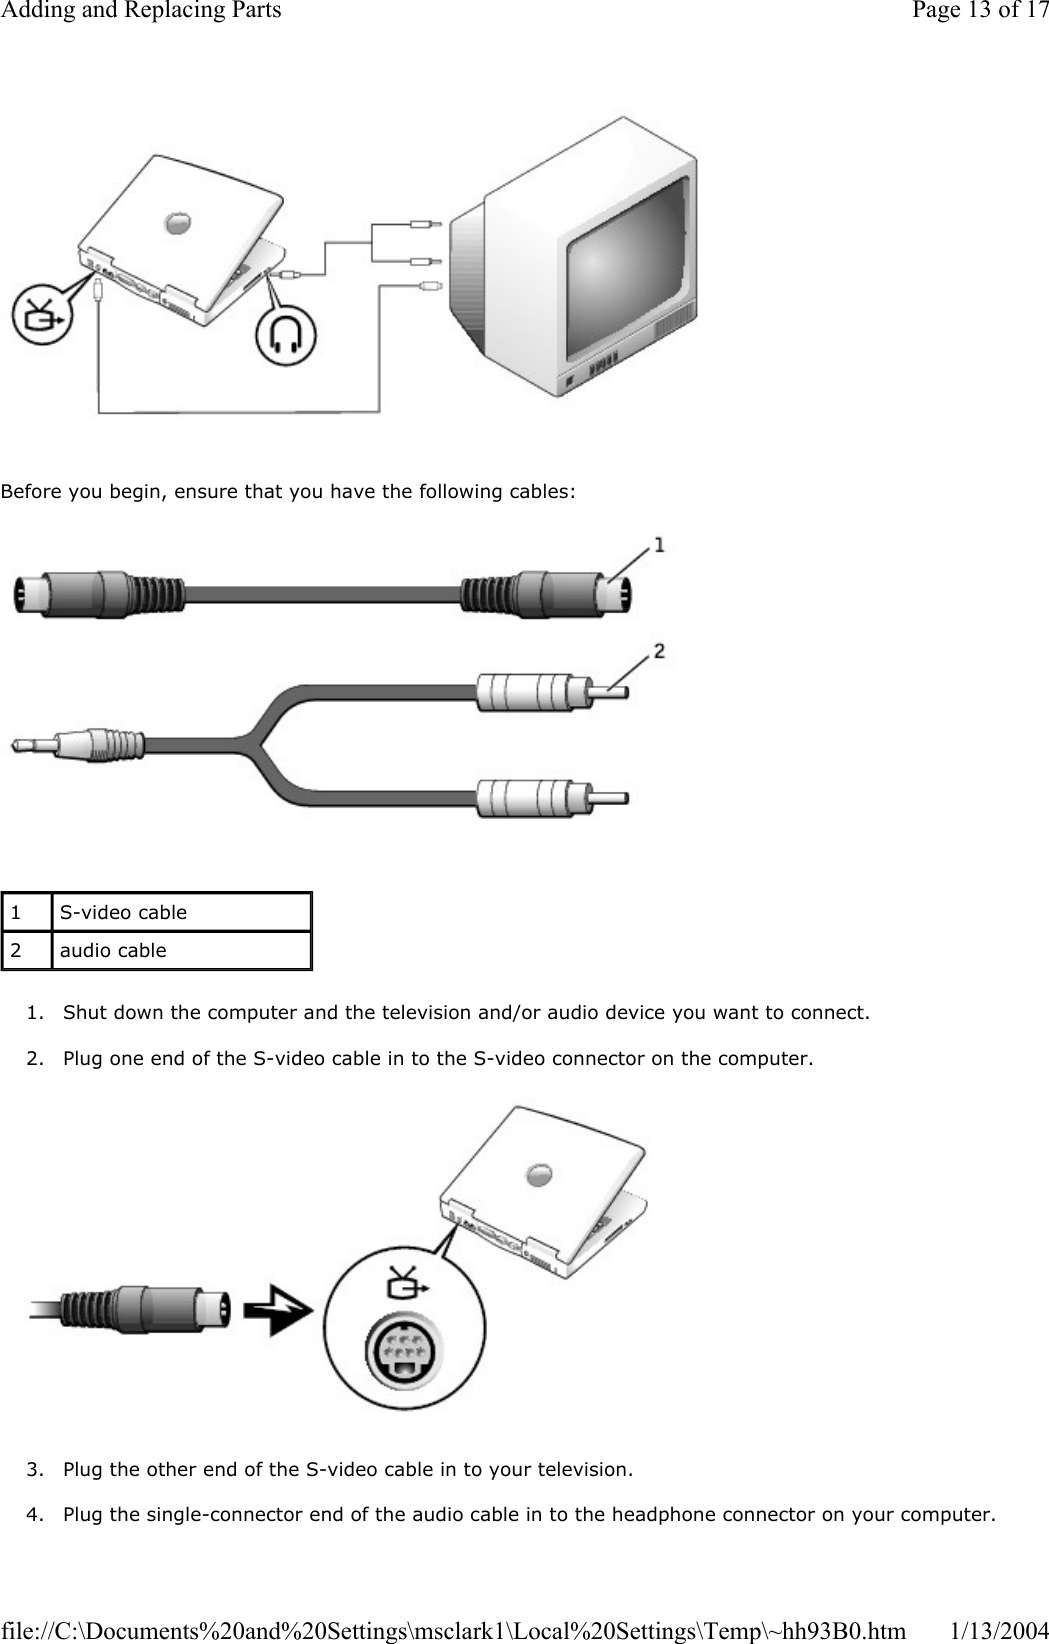 Before you begin, ensure that you have the following cables: 1. Shut down the computer and the television and/or audio device you want to connect. 2. Plug one end of the S-video cable in to the S-video connector on the computer. 3. Plug the other end of the S-video cable in to your television. 4. Plug the single-connector end of the audio cable in to the headphone connector on your computer. 1S-video cable 2audio cable Page 13 of 17Adding and Replacing Parts1/13/2004file://C:\Documents%20and%20Settings\msclark1\Local%20Settings\Temp\~hh93B0.htm